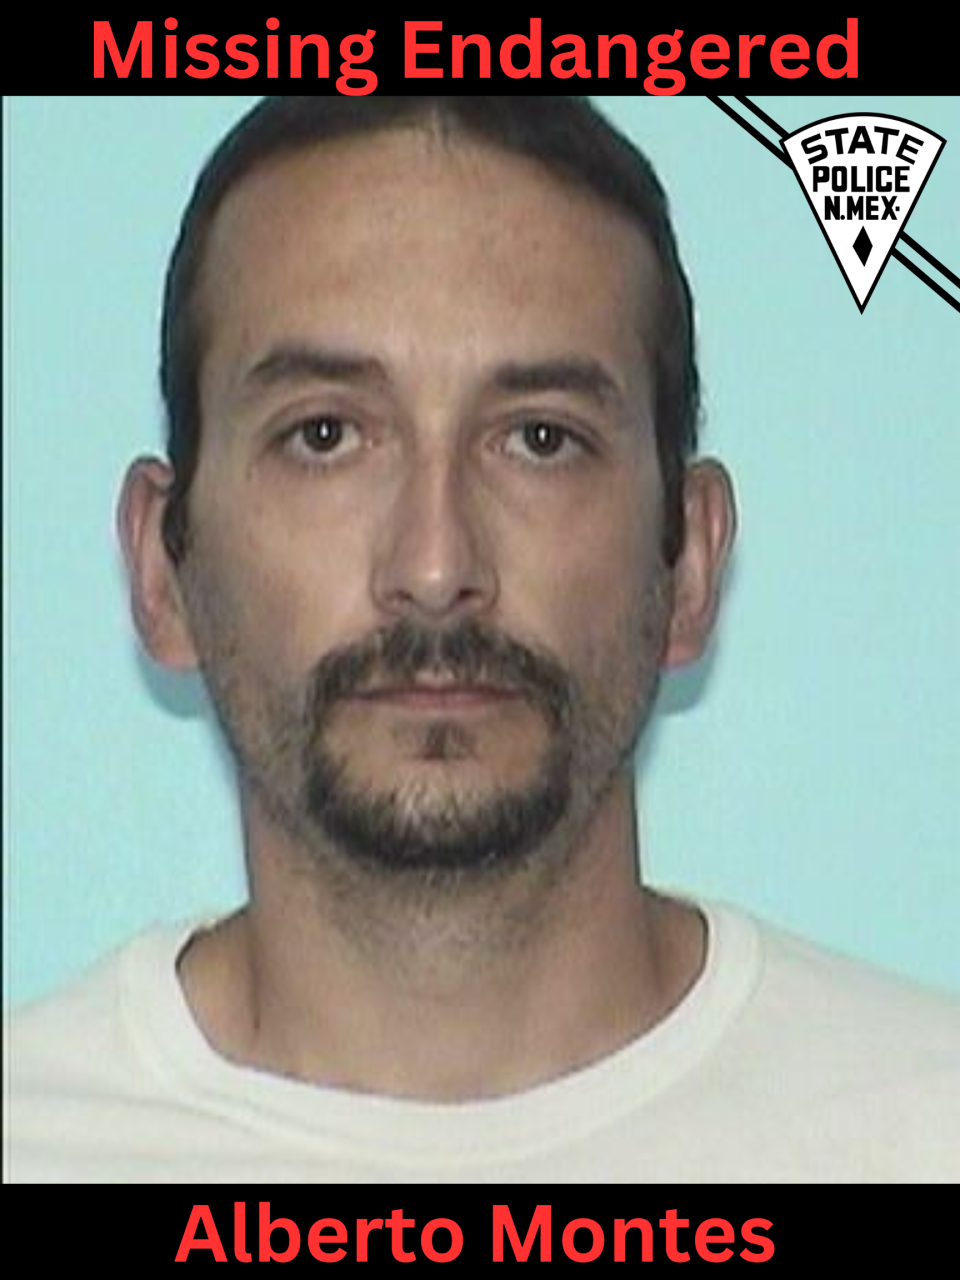 Alberto Montes, 34,is 5 feet 9 inches tall, 160 lbs with brown eyes and brown hair